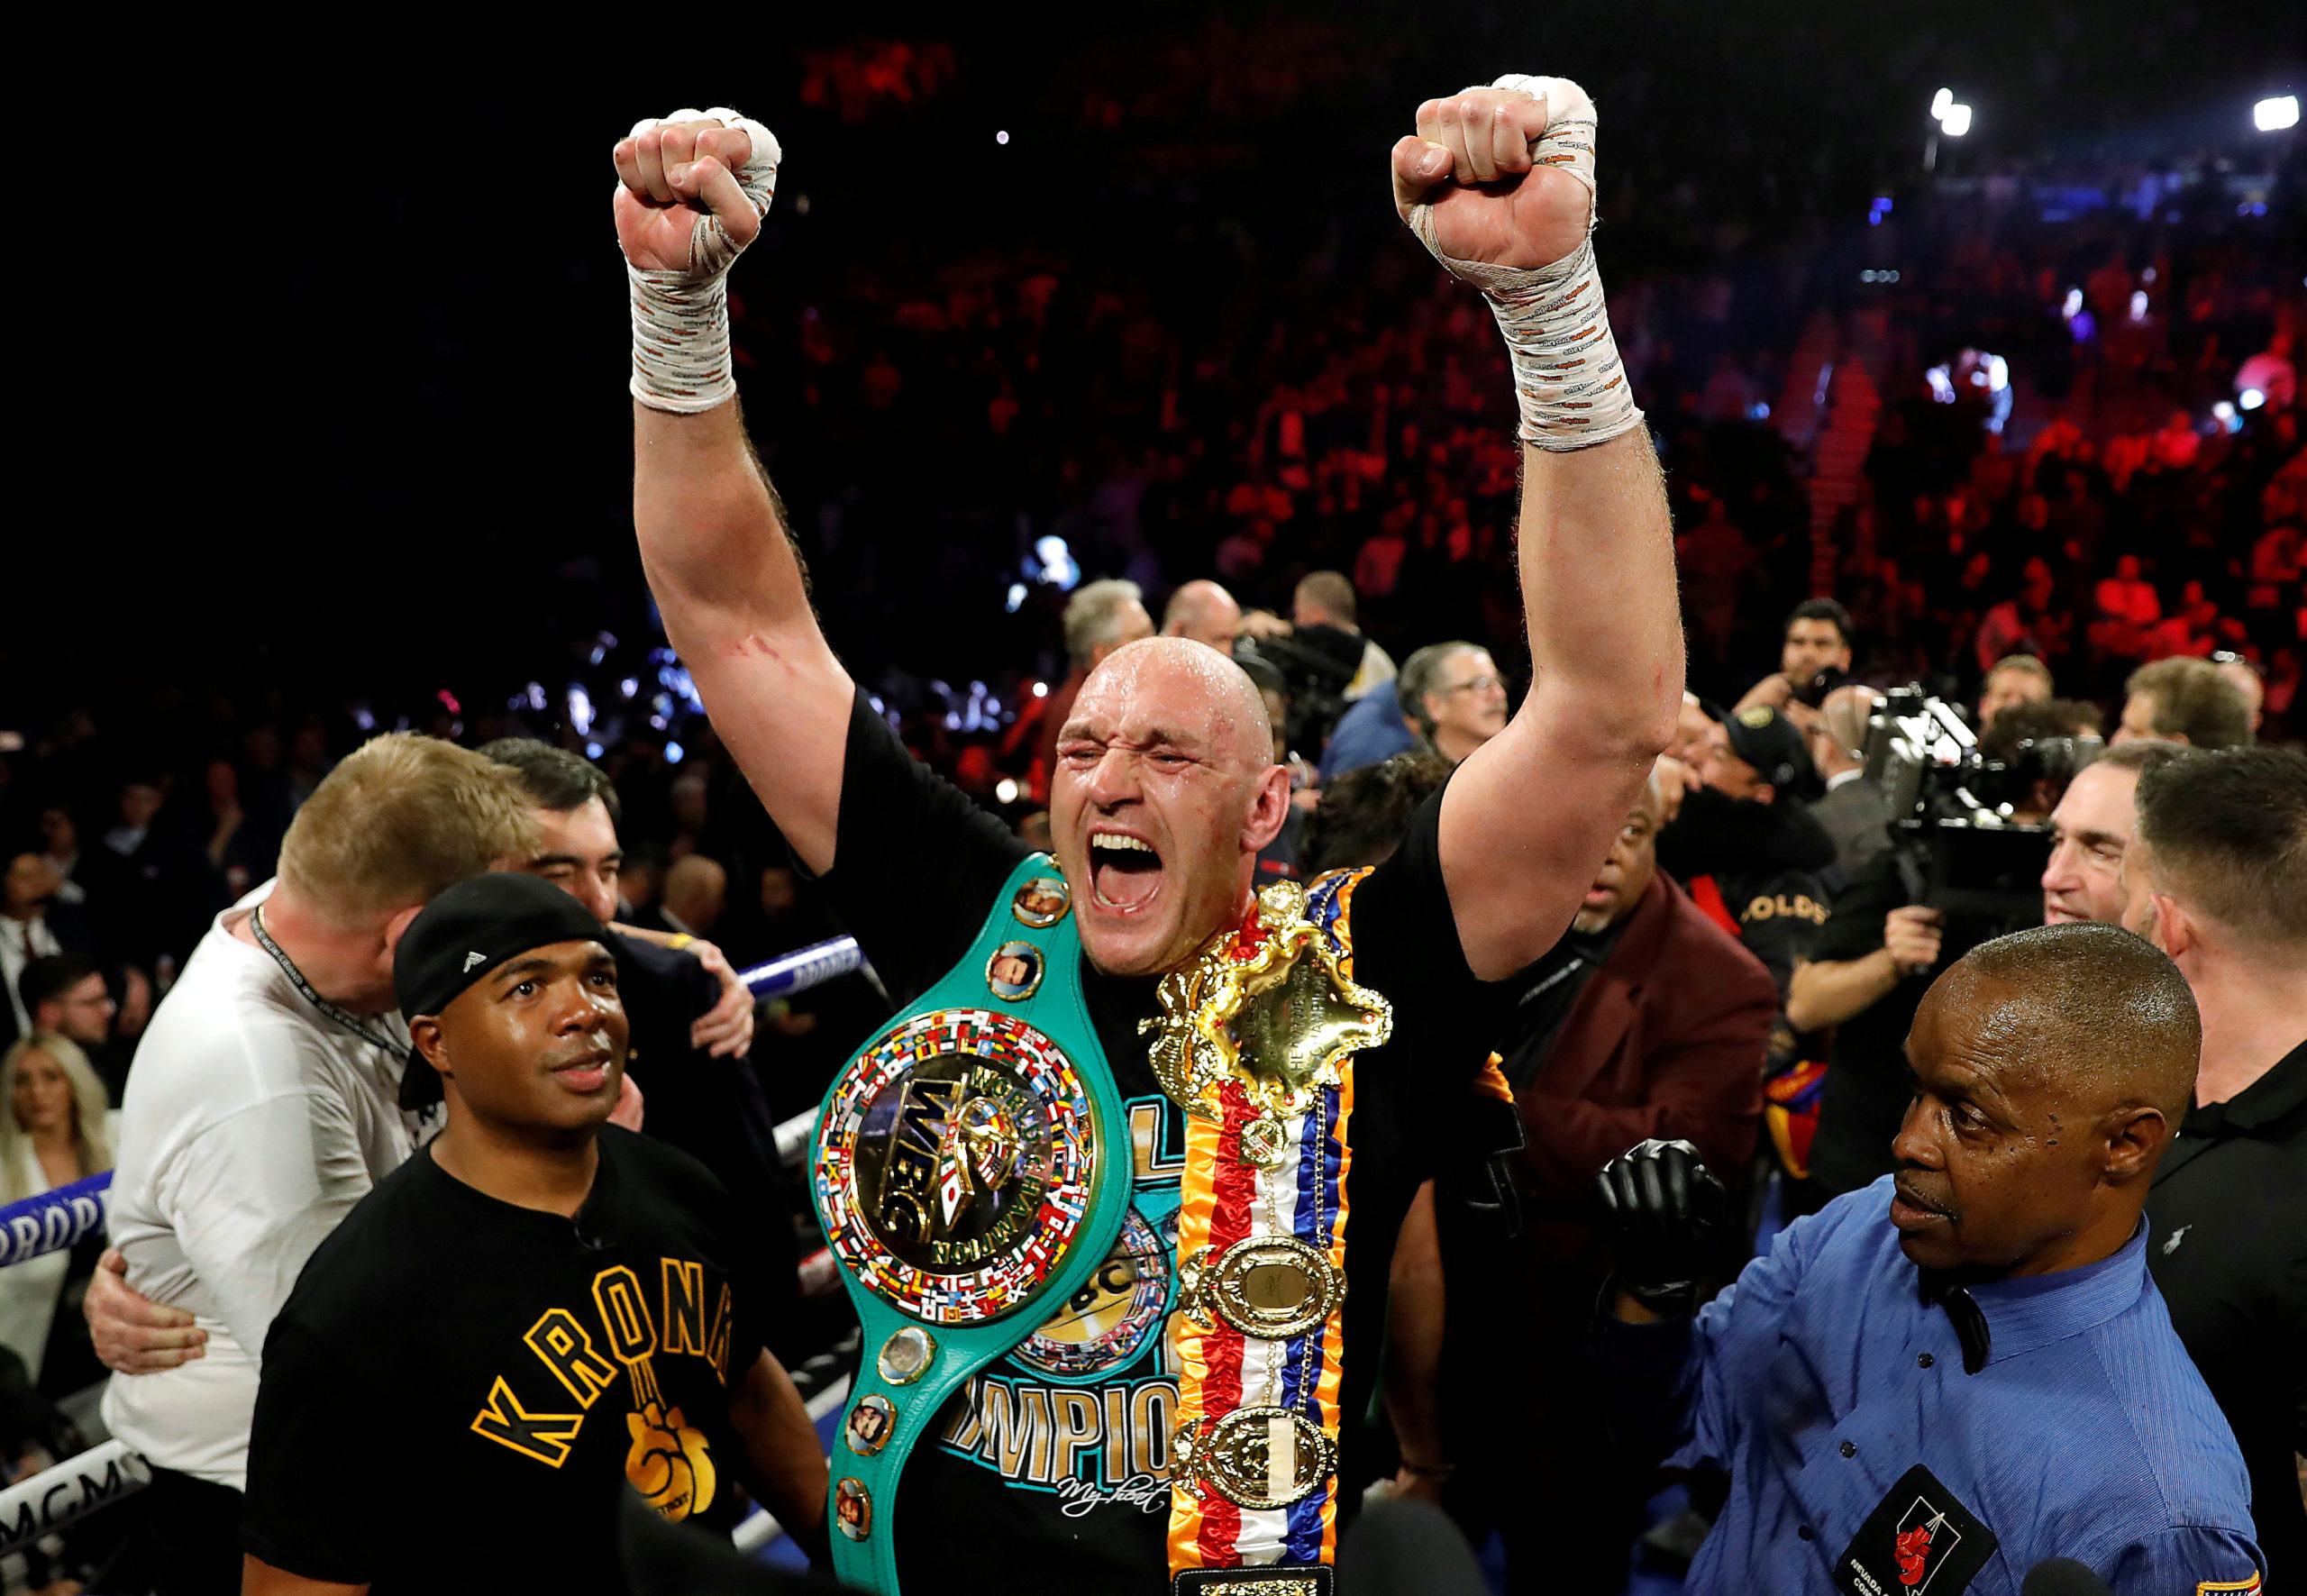 Tyson Fury and Anthony Joshua will fight this year with "no more issues" to prevent the heavyweight unification bout from happening, promoter Bob Arum said on Wednesday. Joshua beat Bulgarian Kubrat Pulev in December to retain his IBF, WBO and WBA titles and his promoter Eddie Hearn said last month that the deal for a clash with fellow Briton Fury - who holds the WBC belt - was done. However, Fury last week played down the chances of the bout happening this year, saying that no progress has been made in fixing the fight due to delays caused by the COVID-19 pandemic and logistical issues. Asked on Wednesday if the fight was on, Fury's promoter Arum told iFL TV: "Yeah, as far as I'm concerned. That's what each side has said. Now, we're scrambling around to get the thing signed and everything. "But I can say clearly, based on my view on everything, that there are no more issues." Fury has not fought for a year since his knockout victory against American Deontay Wilder.